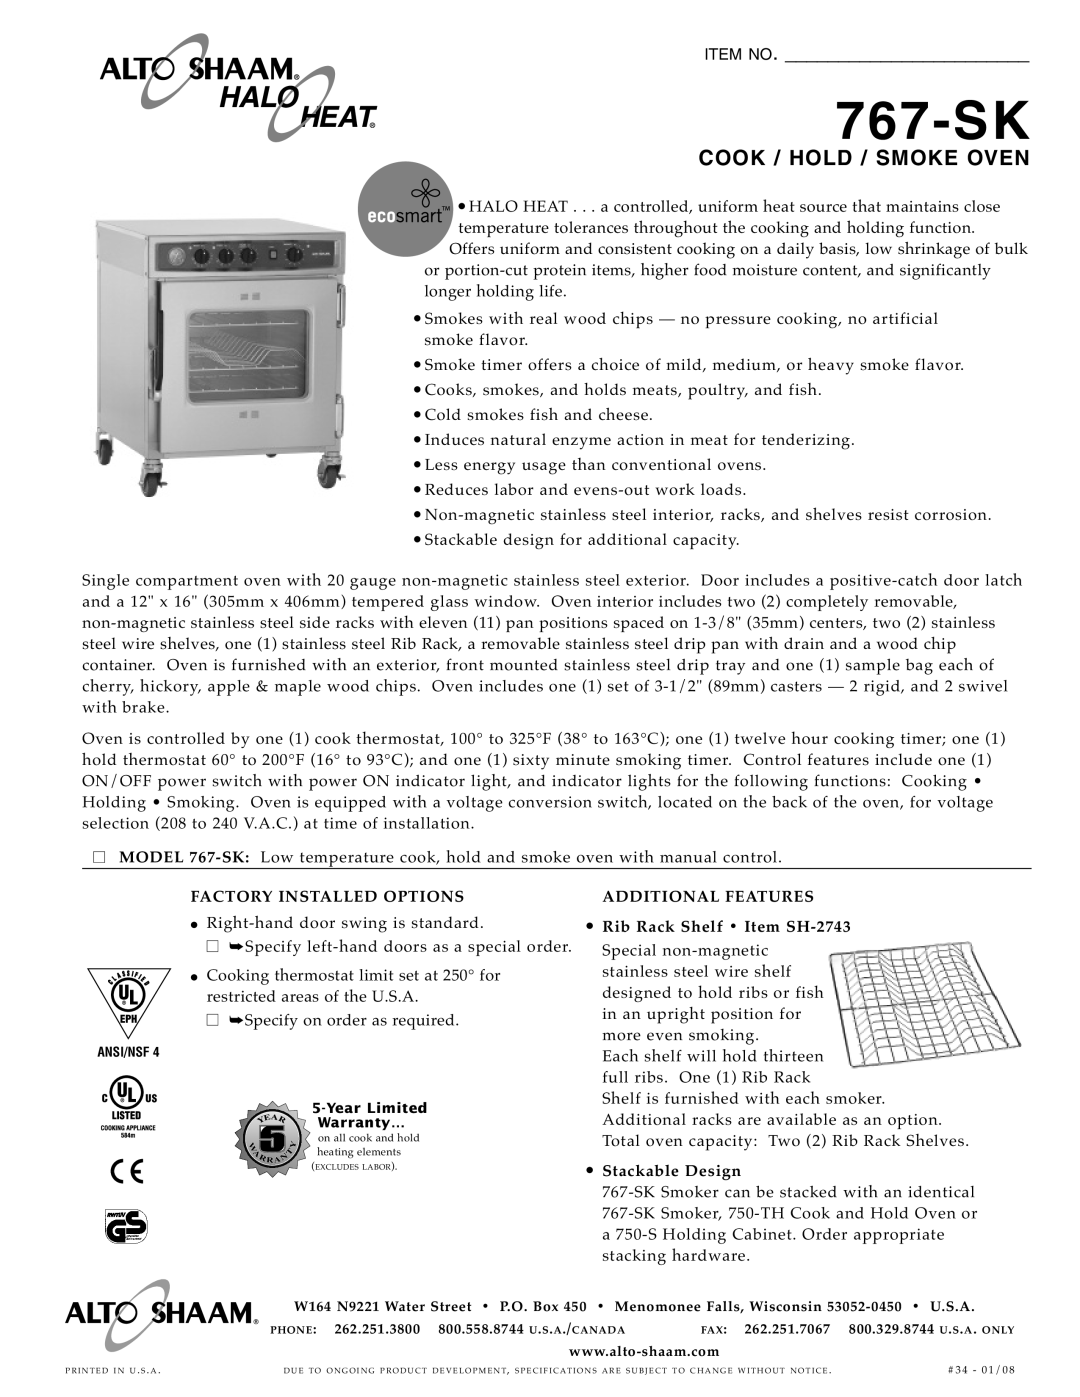 Alto-Shaam 767-SK warranty 767 -SK, Cook / Hold / Smo Ke Oven, Item No, Factory Installed O Ptions, Addit Iona L F Eatures 